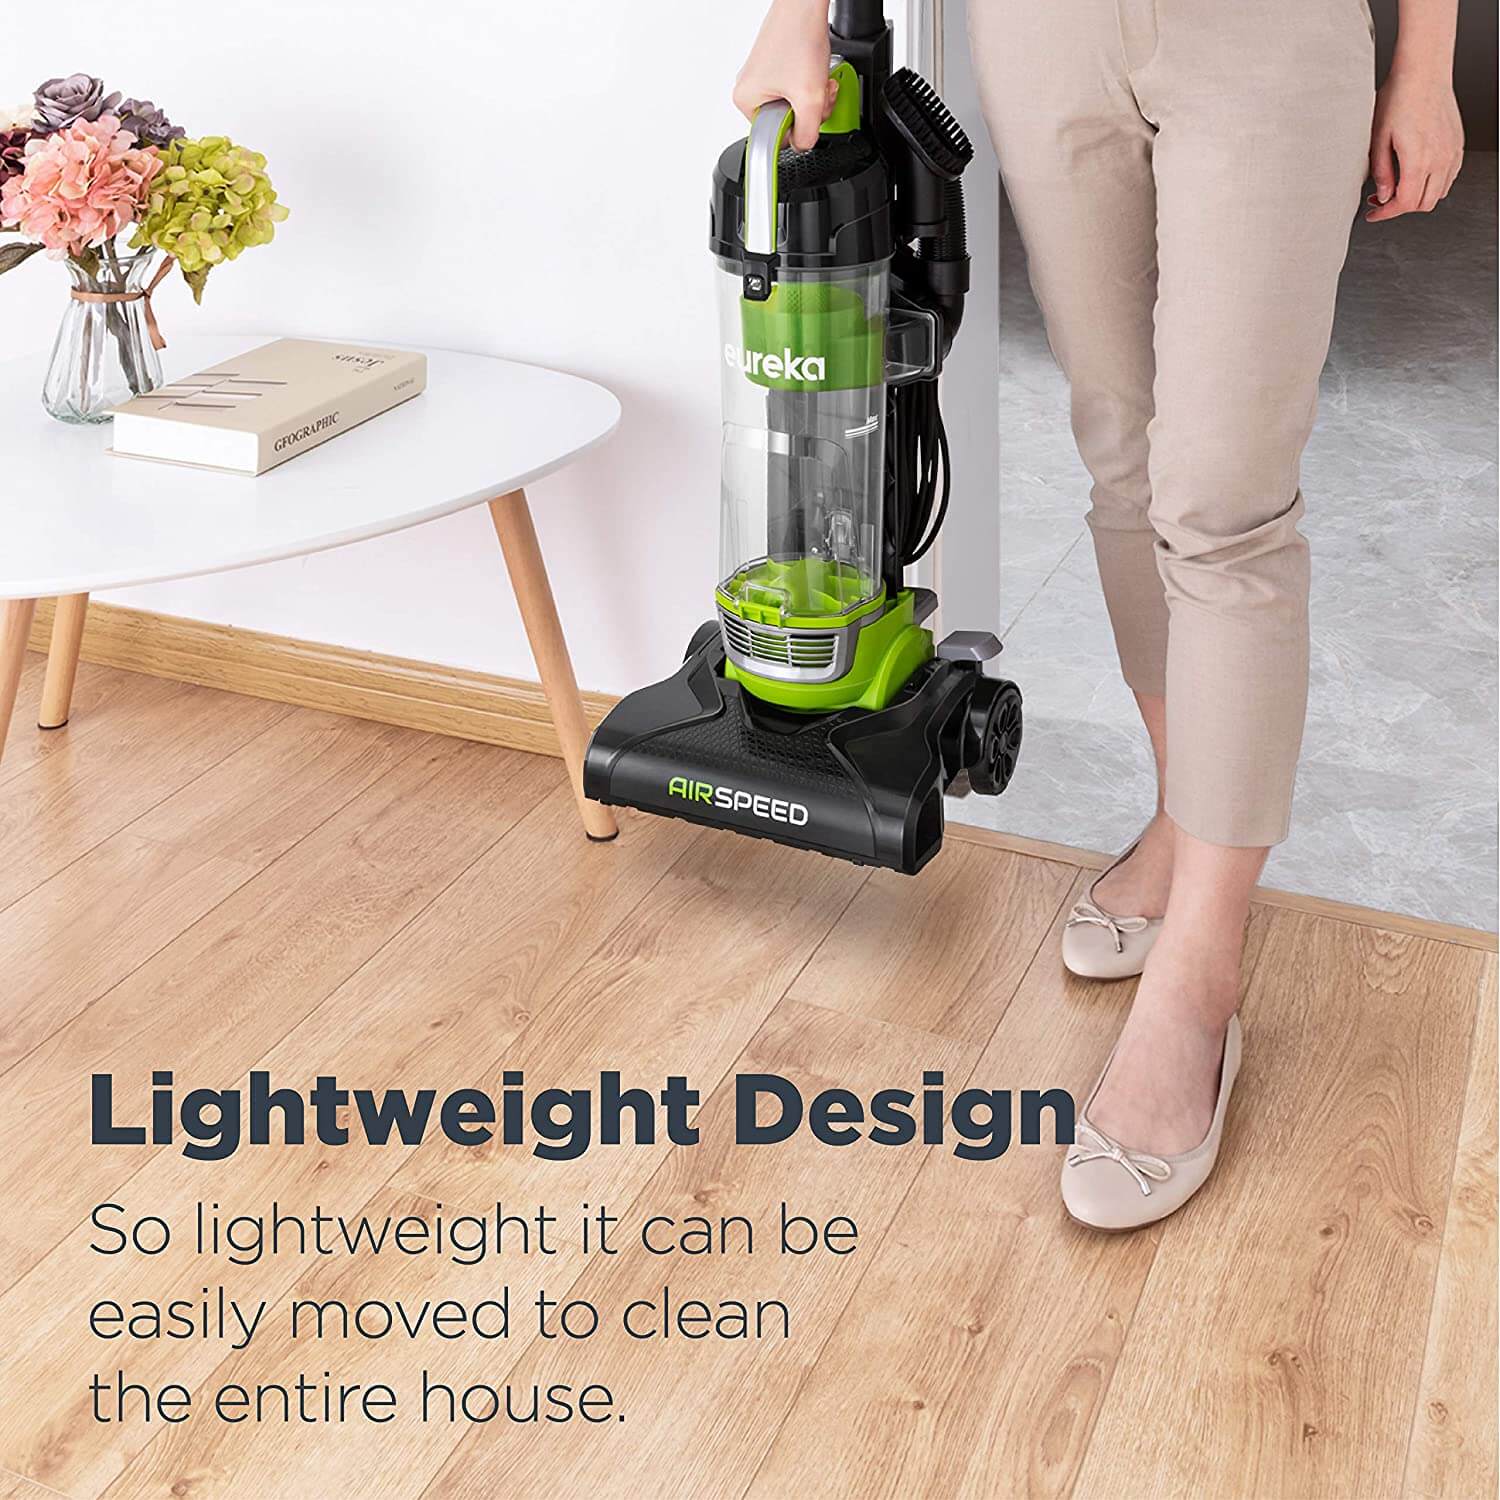 5 Best Budget Vacuums to Buy in 2022